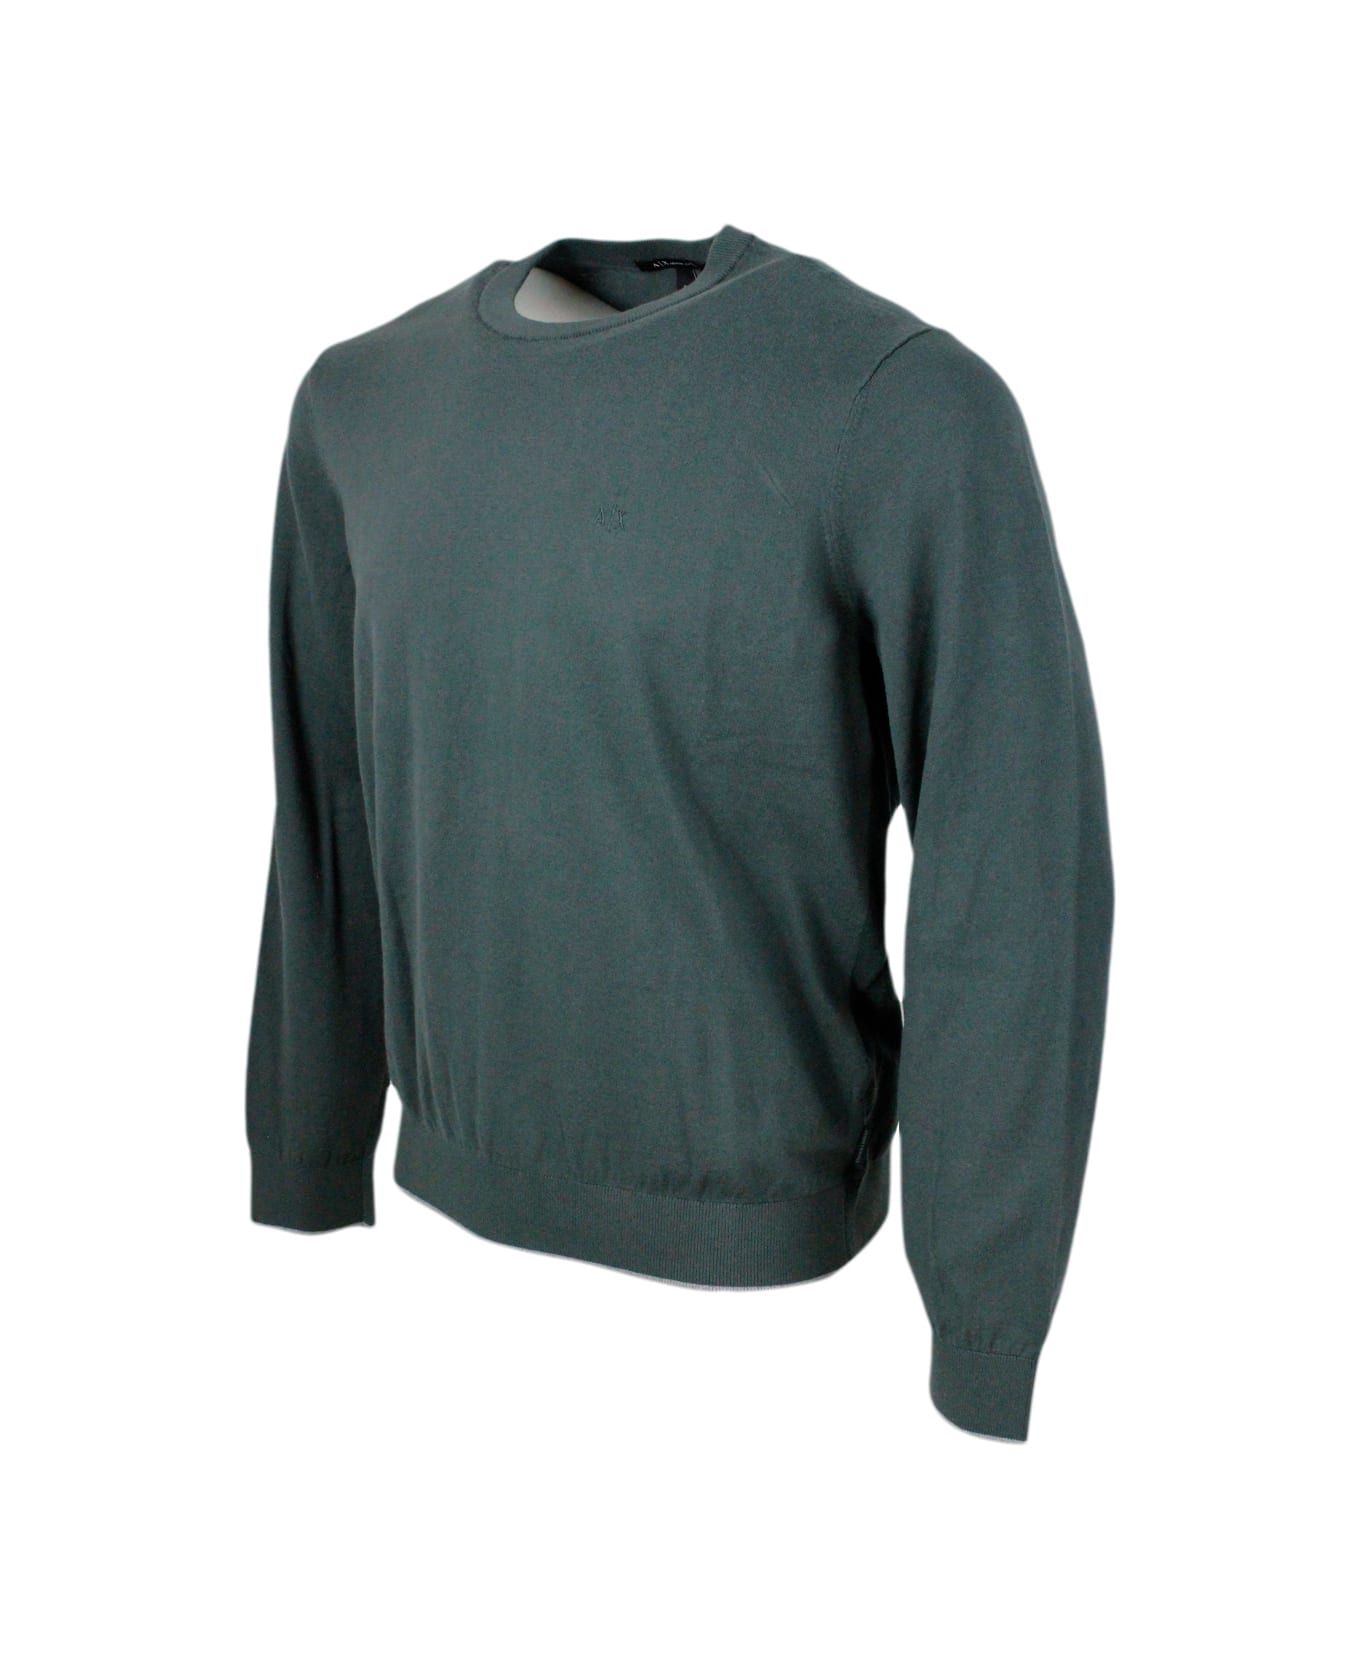 Armani Collezioni Lightweight Long-sleeved Crew-neck Sweater Made Of Warm Cotton And Cashmere With Contrasting Color Profiles At The Bottom And On The Cuffs - Verde urban chic ニットウェア